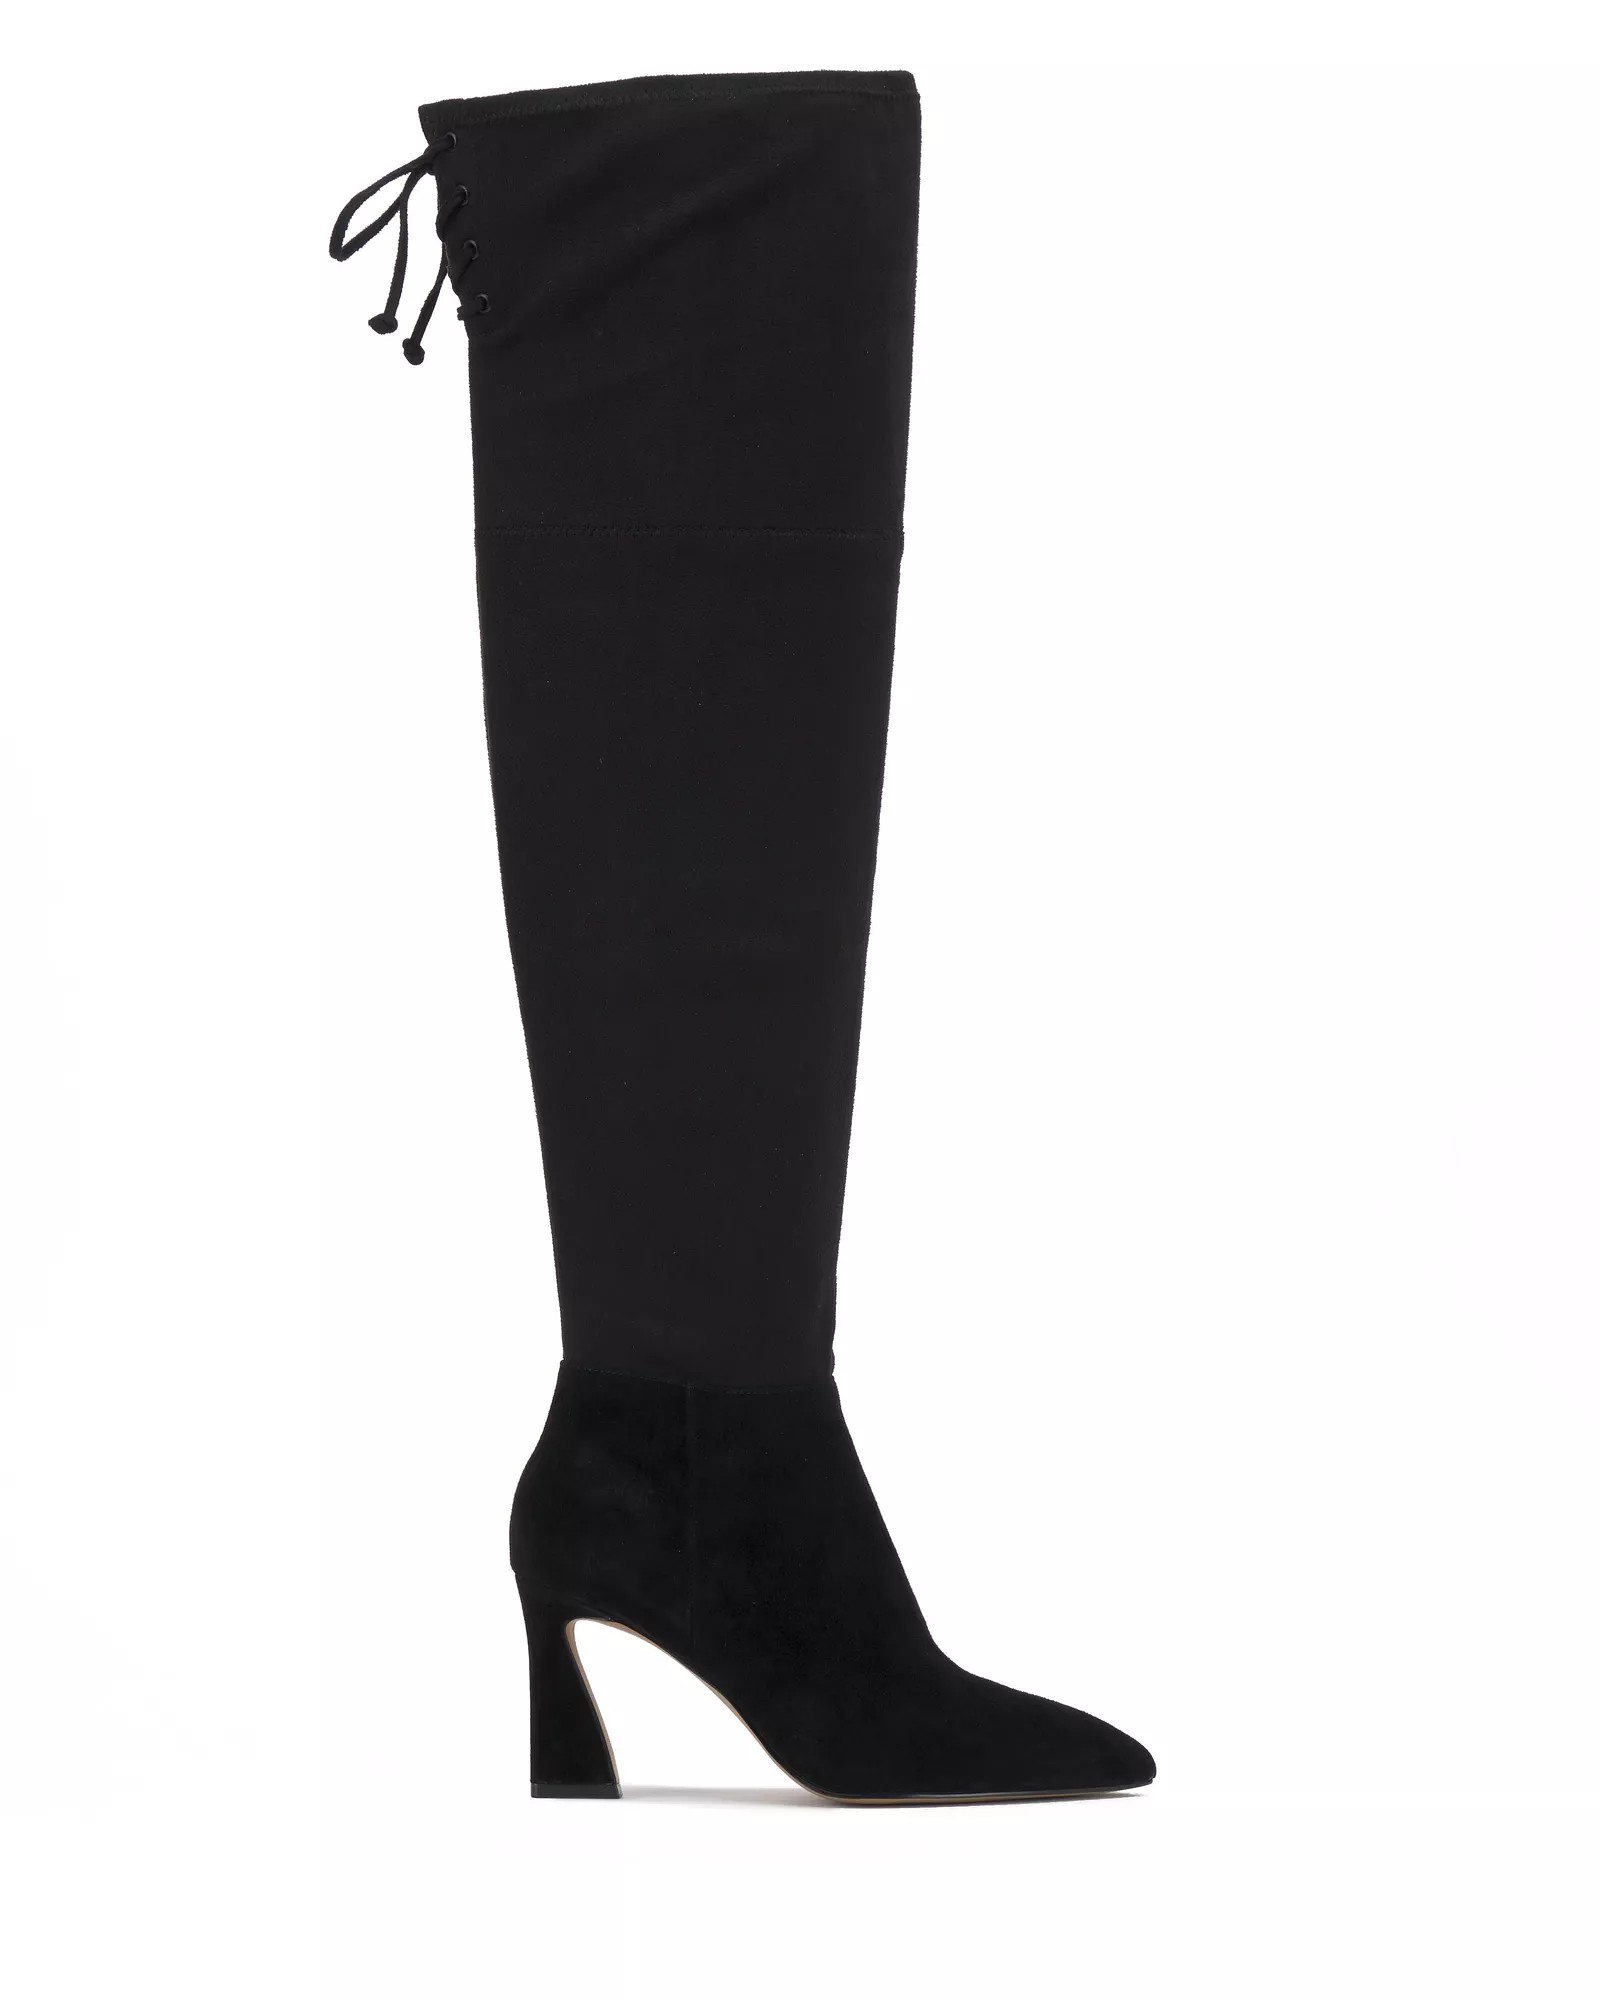 Vince Camuto Minnada Extra Wide-Calf Over-the-Knee Boot